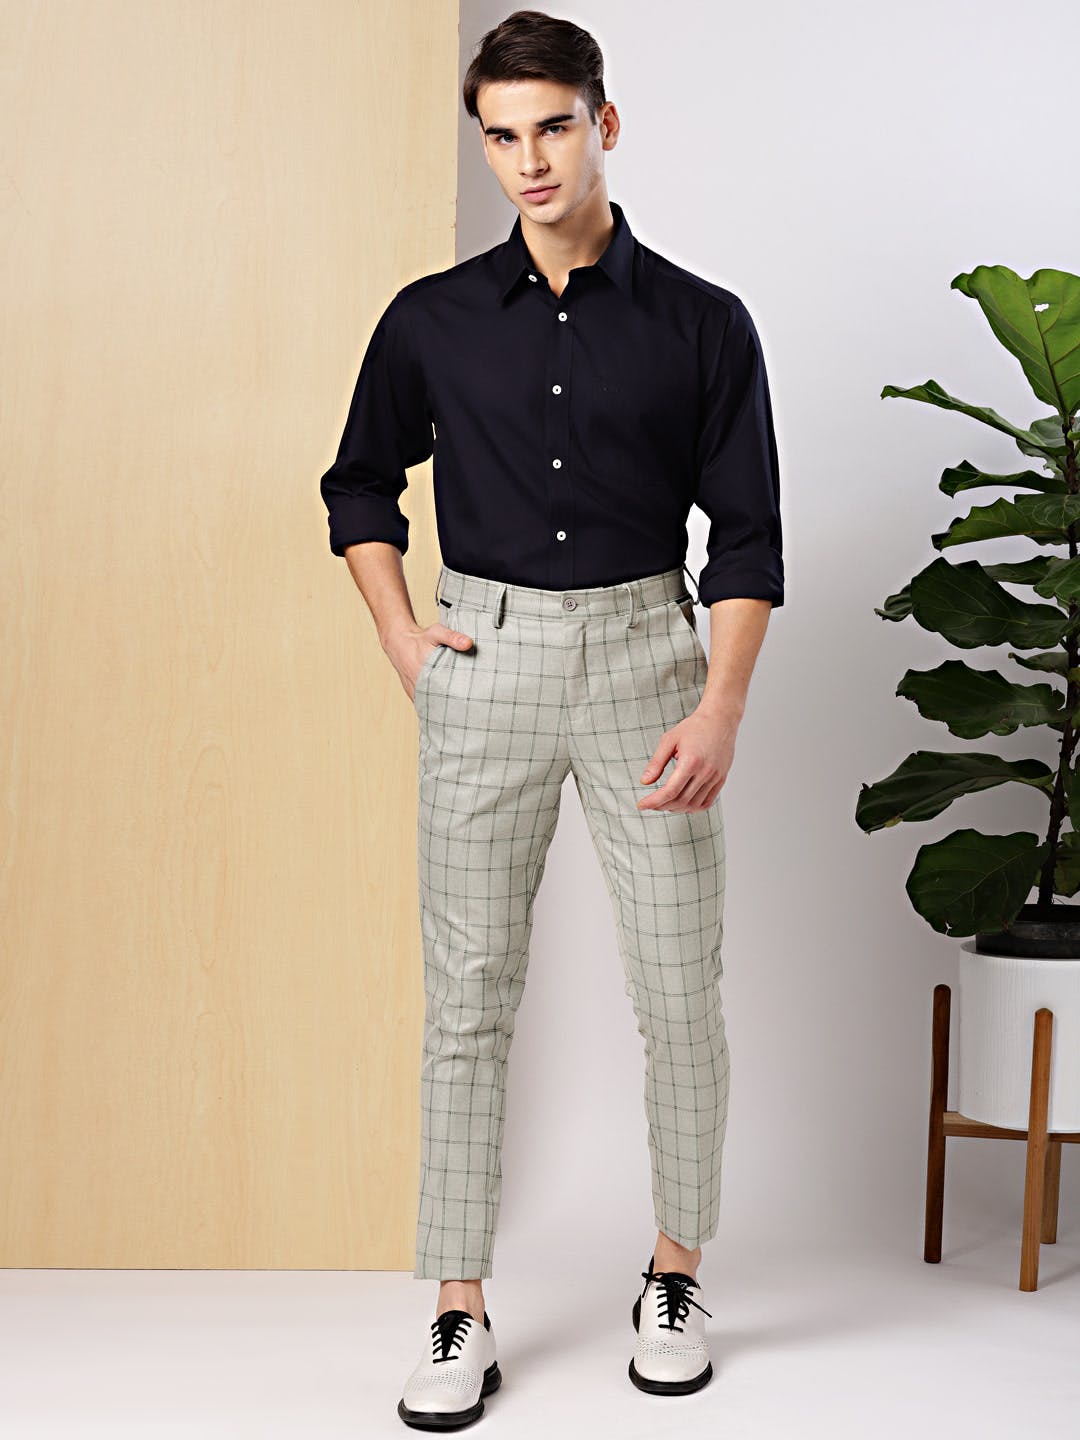 Invictus Formal Trousers - Buy Invictus Formal Trousers online in India